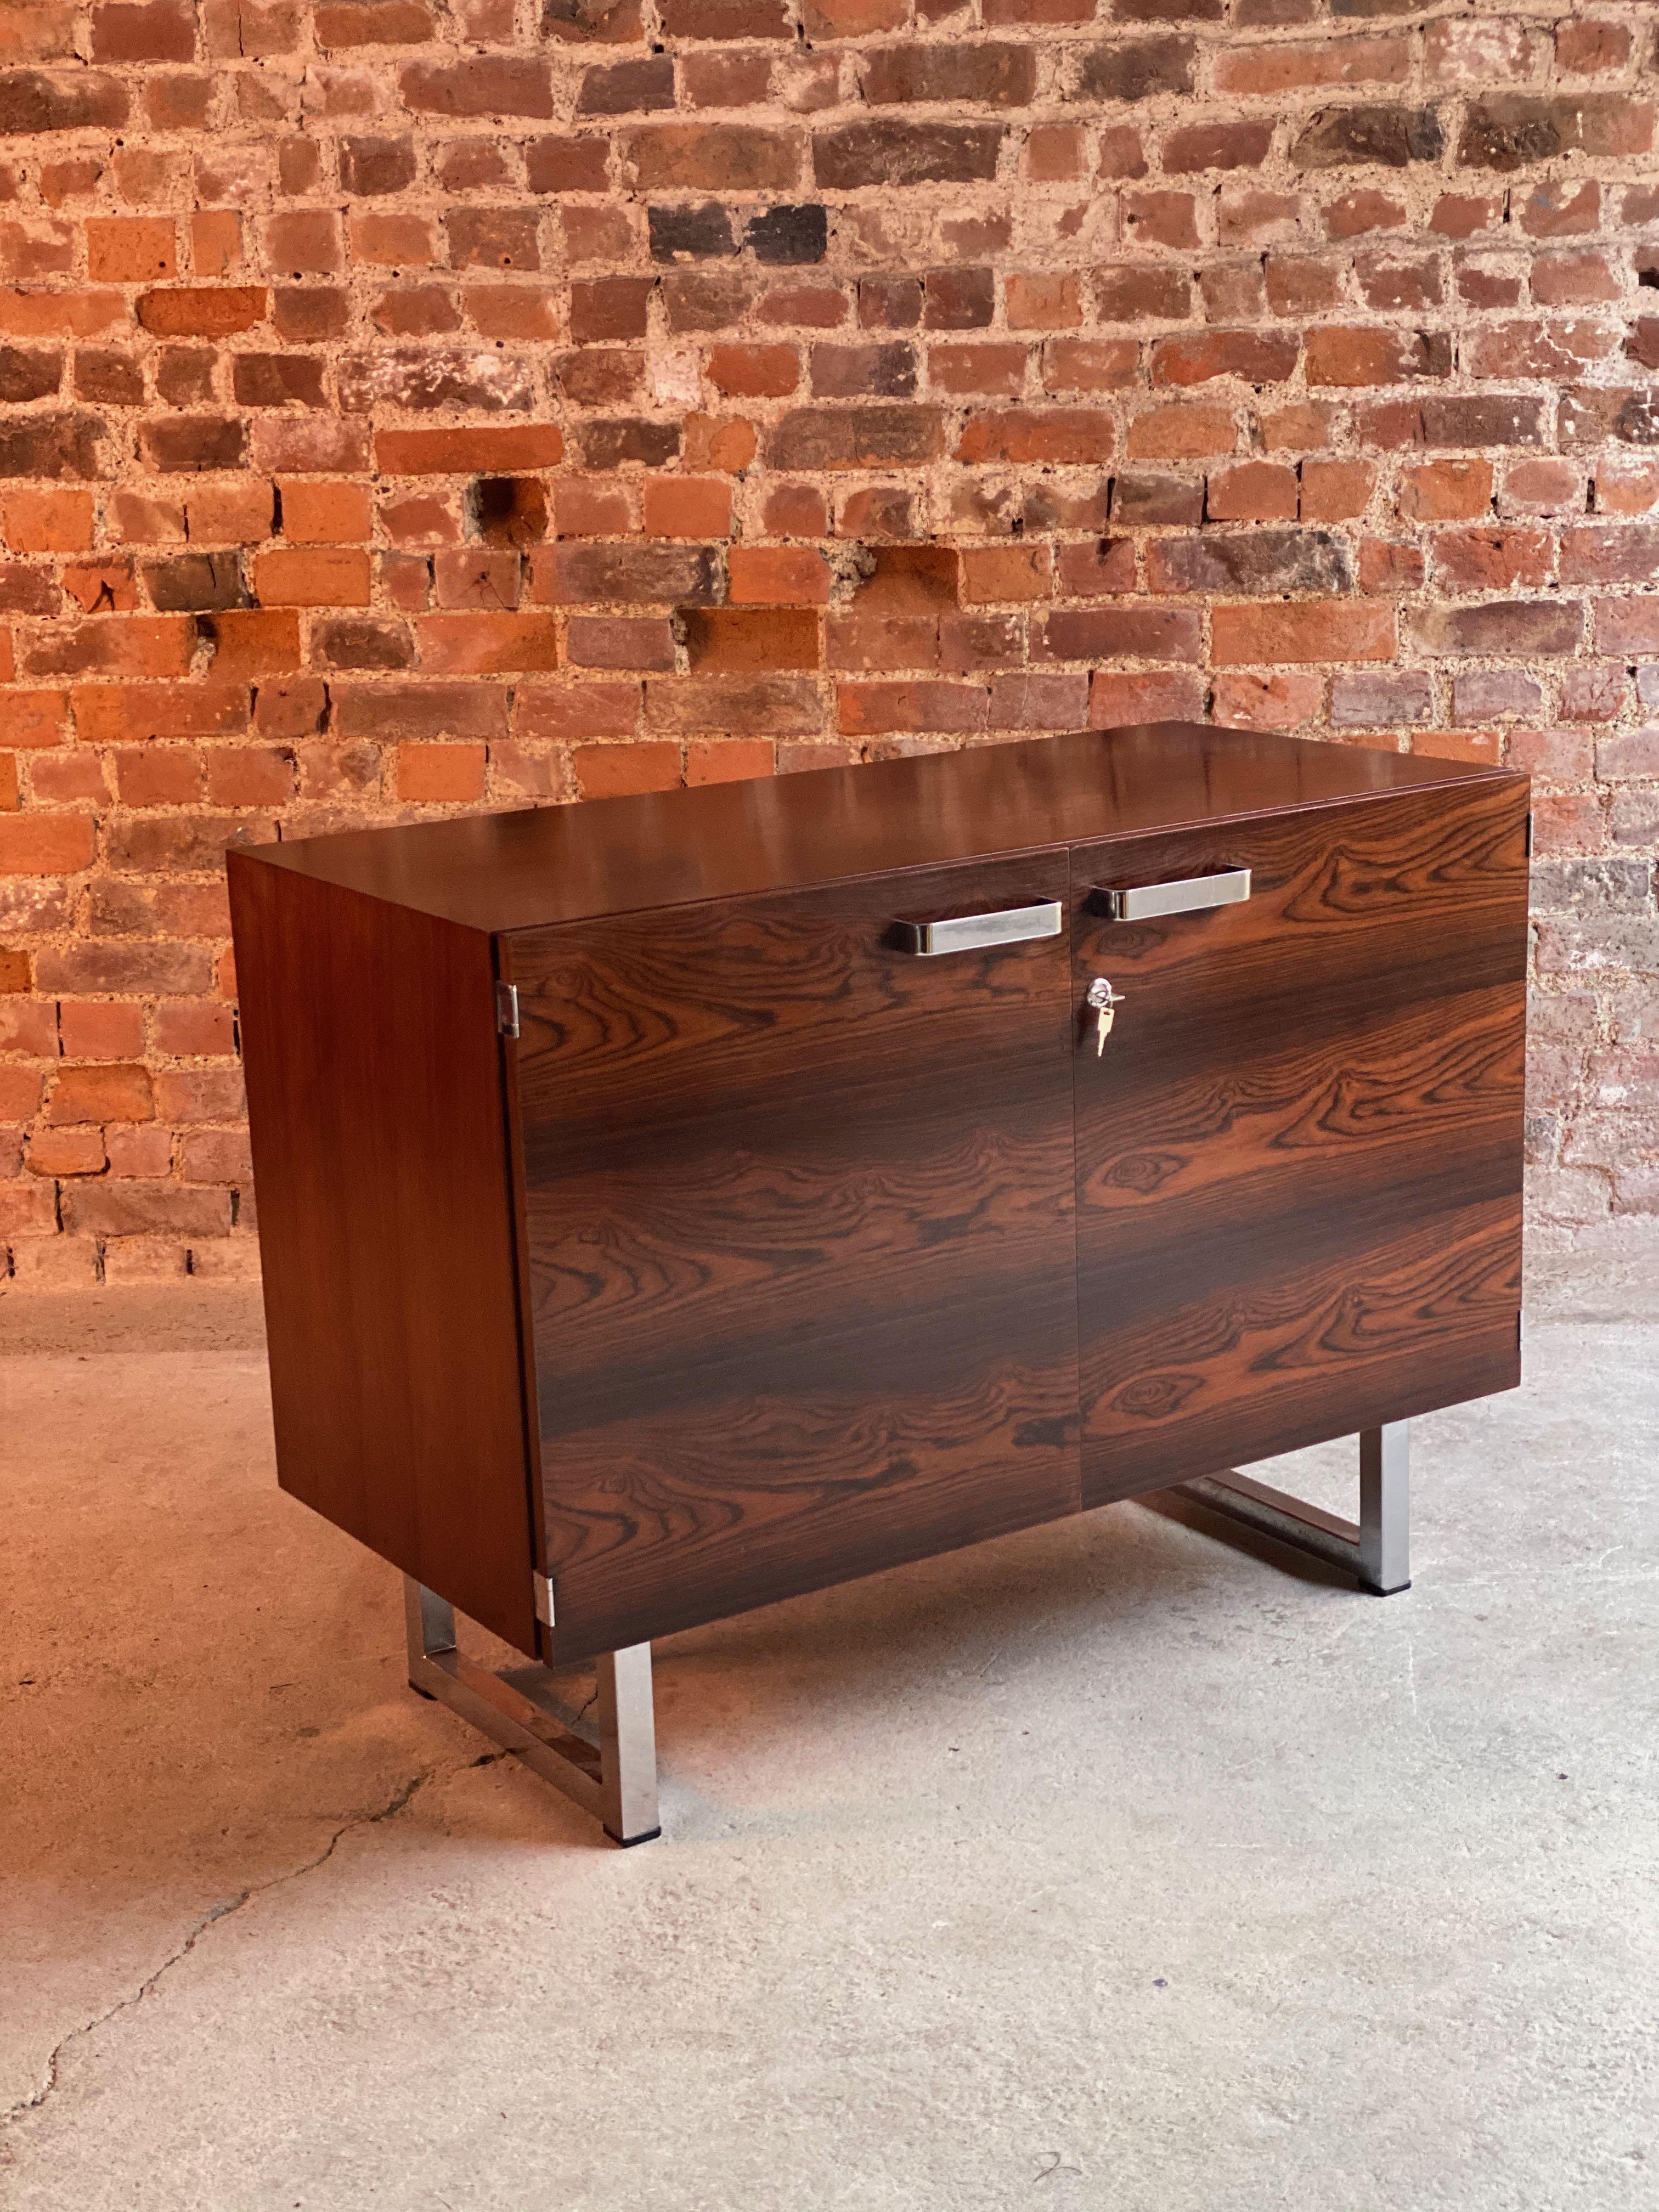 Gordon Russell rosewood credenza prestige range by Trevor Chinn, circa 1975

Gordon Russell rosewood credenza from the Prestige range designed by Ray Leigh and Trevor Chinn circa 1975, Palisander rosewood and chrome, the rectangular top over two